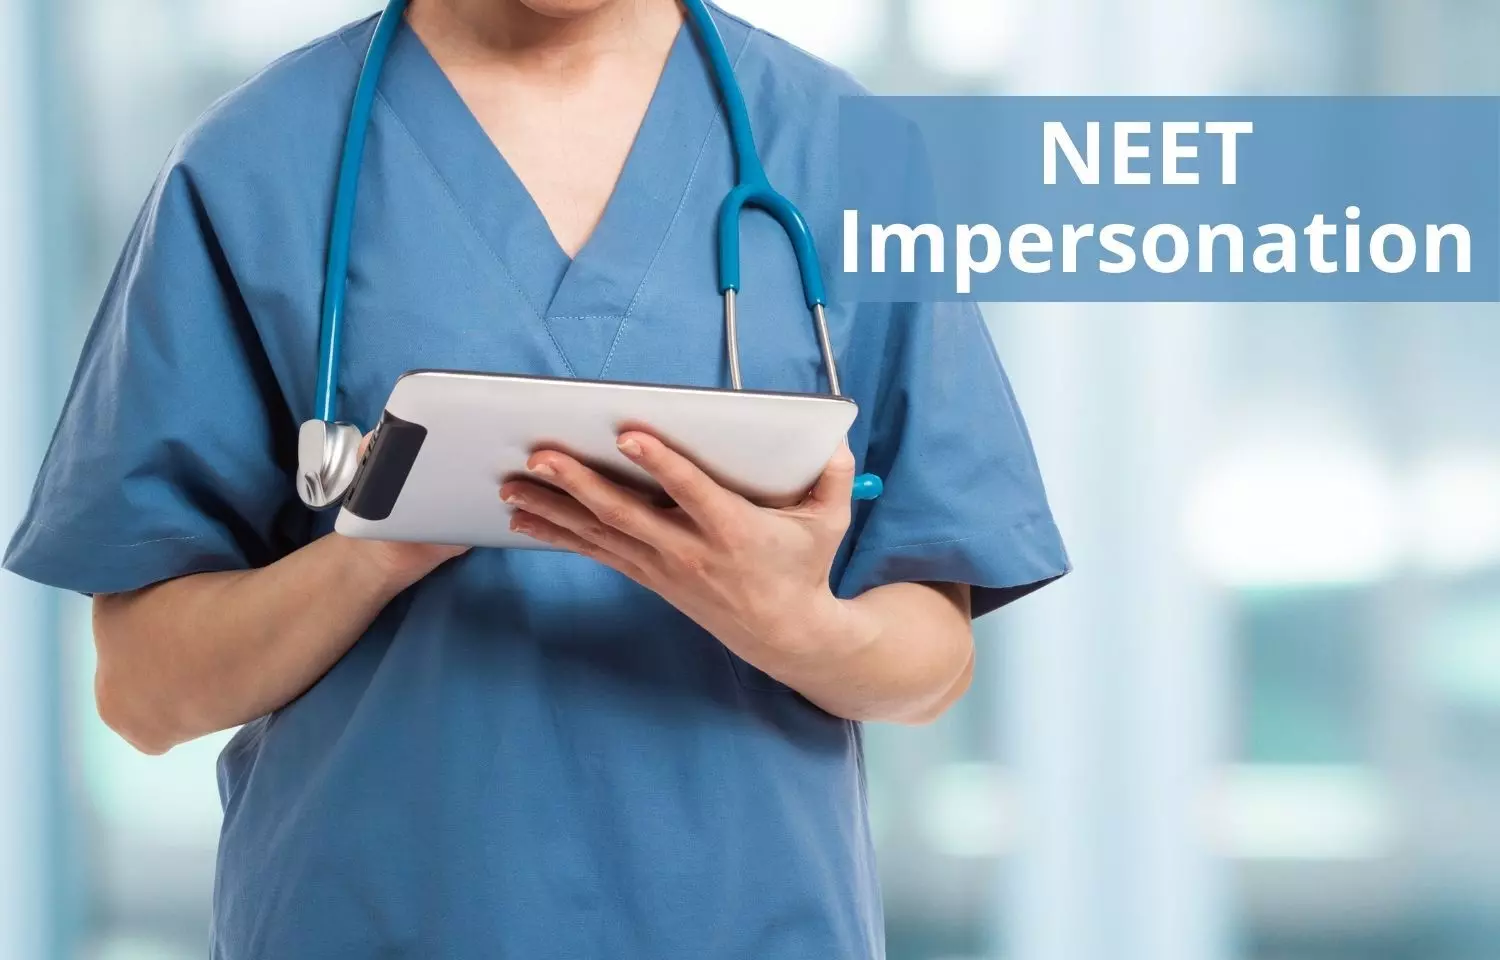 Supreme Court issues notice on impersonation in NEET PG Counselling